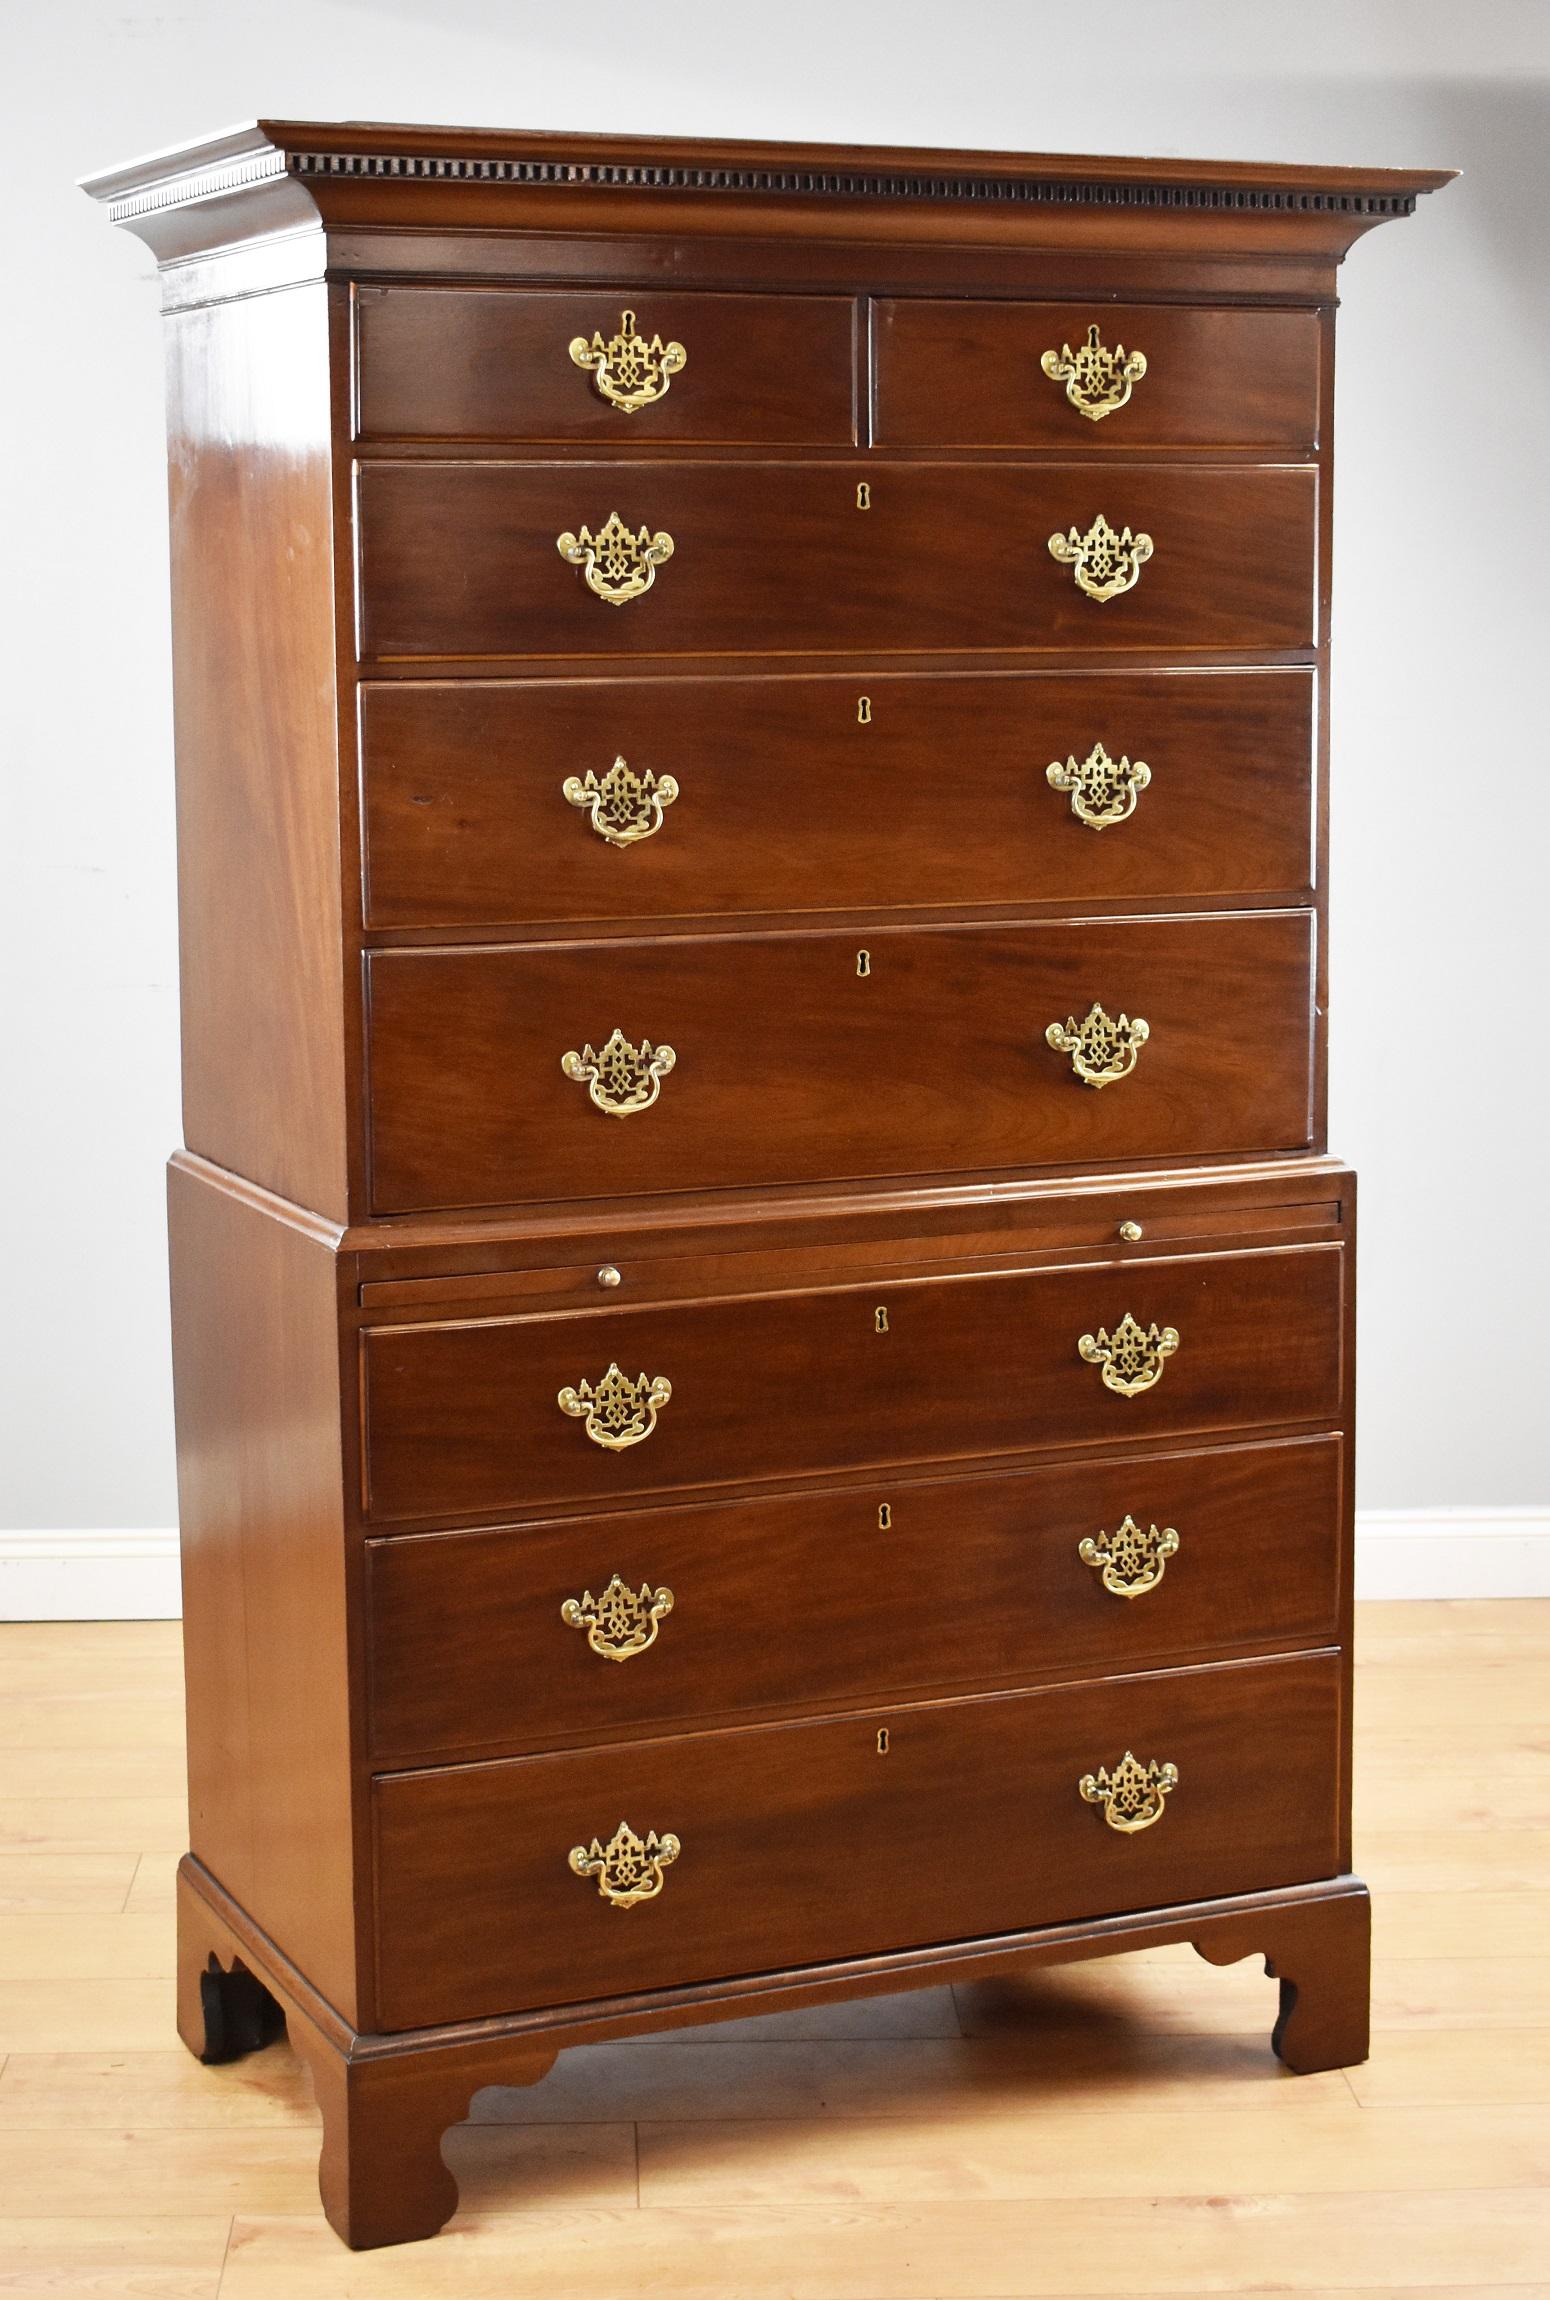 For sale is a good quality George III mahogany chest on chest, having a dentil moulded cornice over an arrangement of five graduated drawers, with two short drawers at the top and three long drawers below. The base has a brushing slide above a